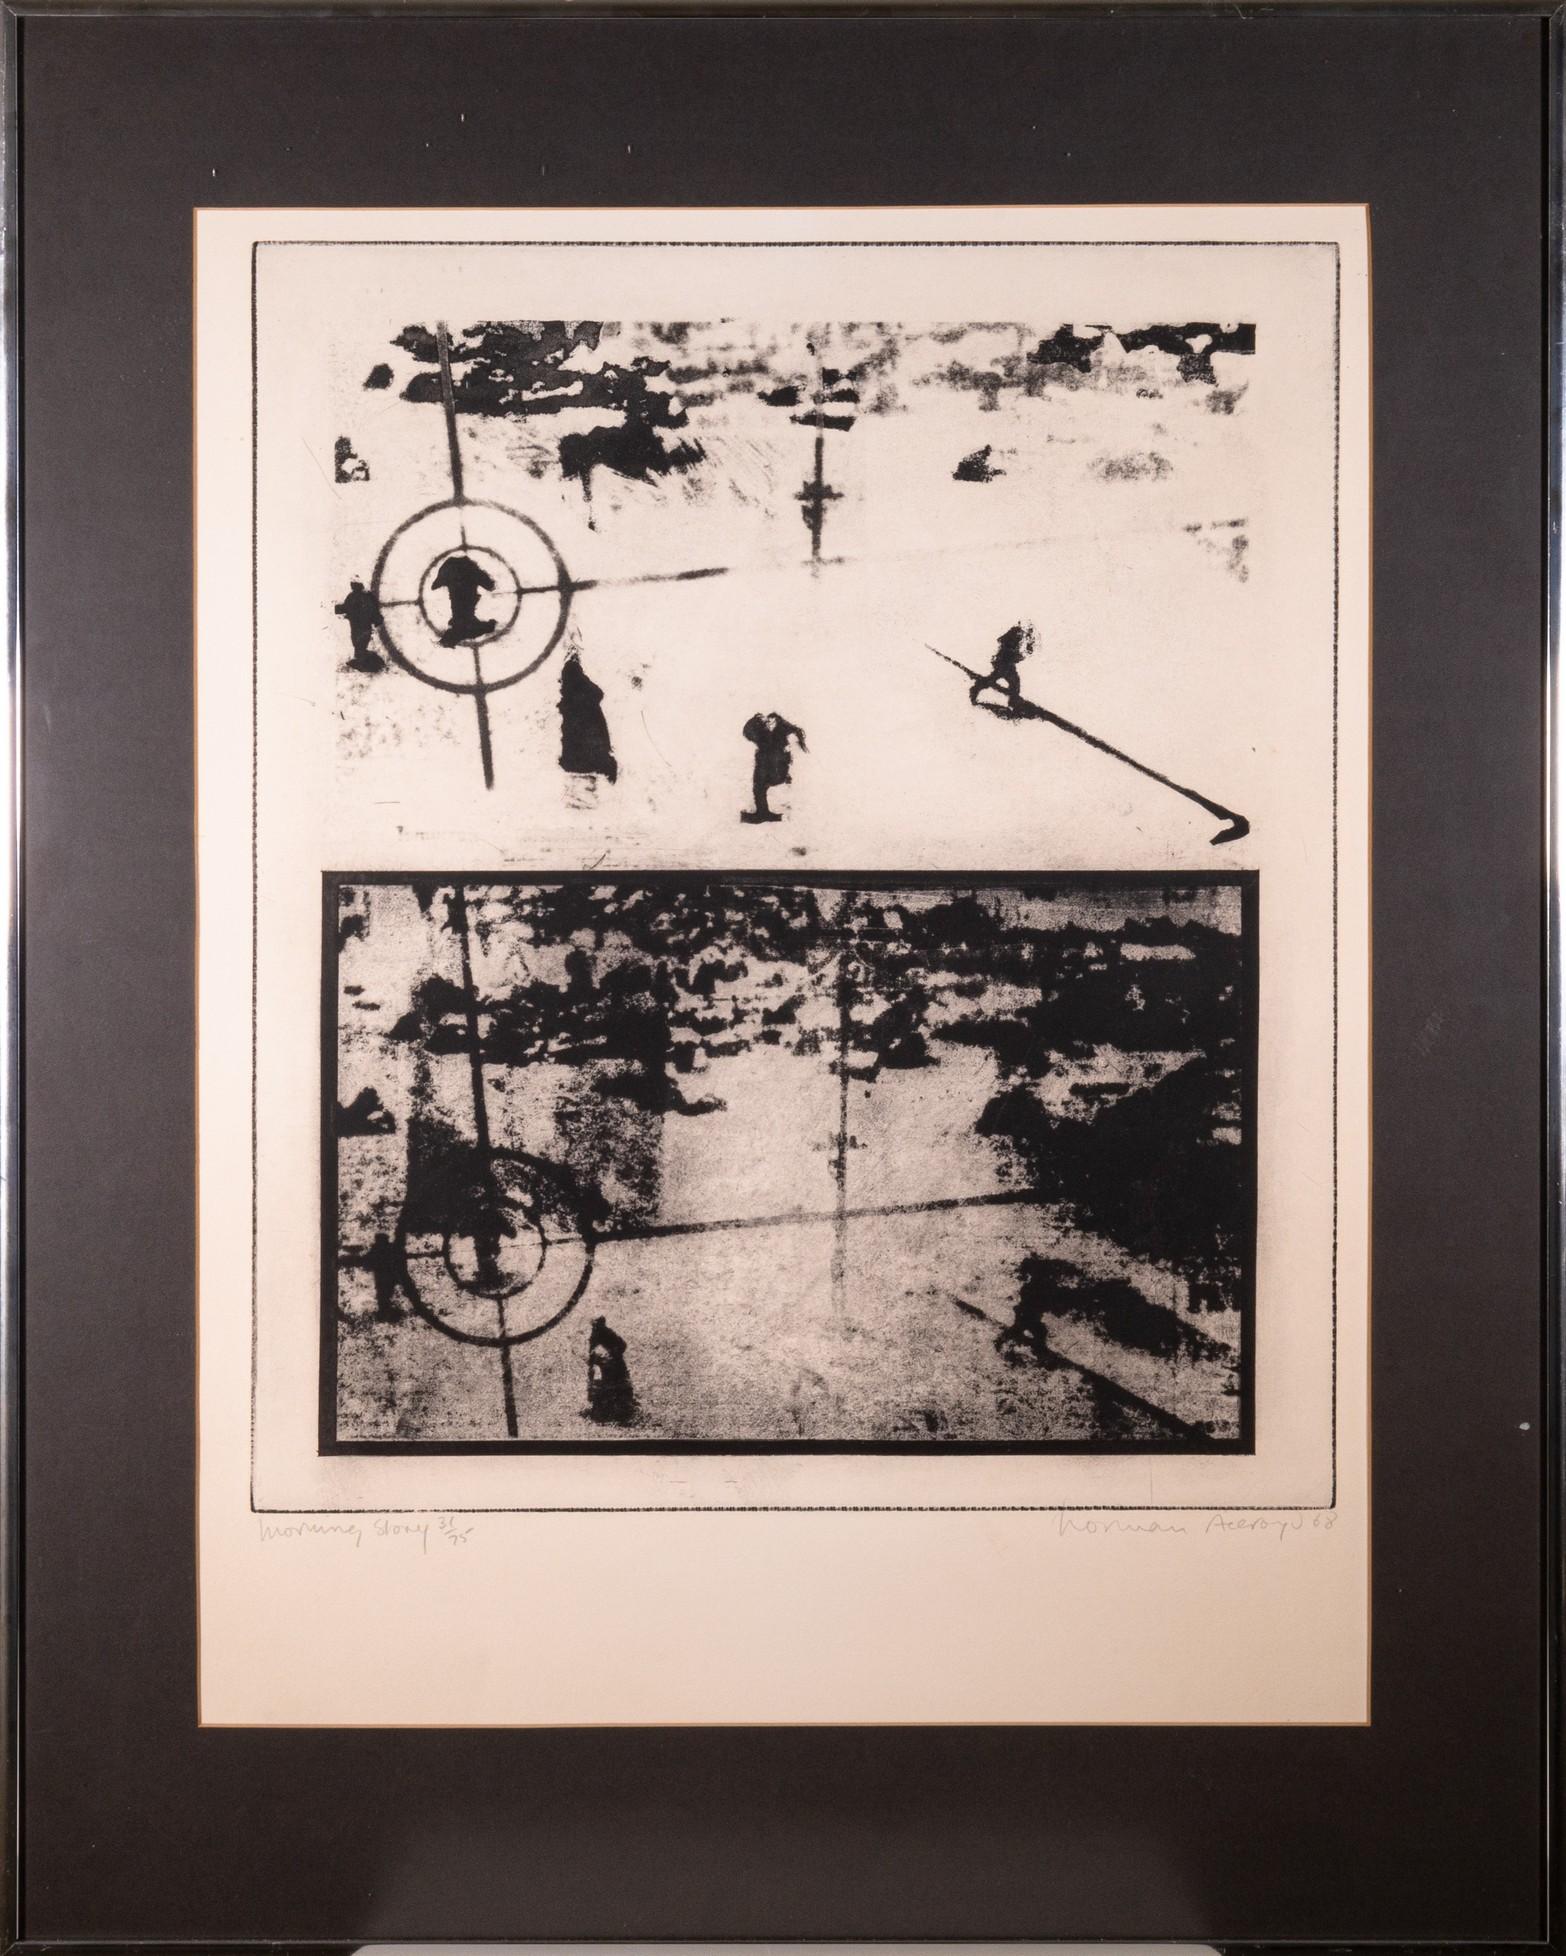 A bold and graphic etching and aquatint on wove paper titled “Morning Story” by Norman Ackroyd. Hand signed in pencil bottom right with a 1968 date and titled with an annotation of 31/75 on the bottom left. A unique minimalistic black and white